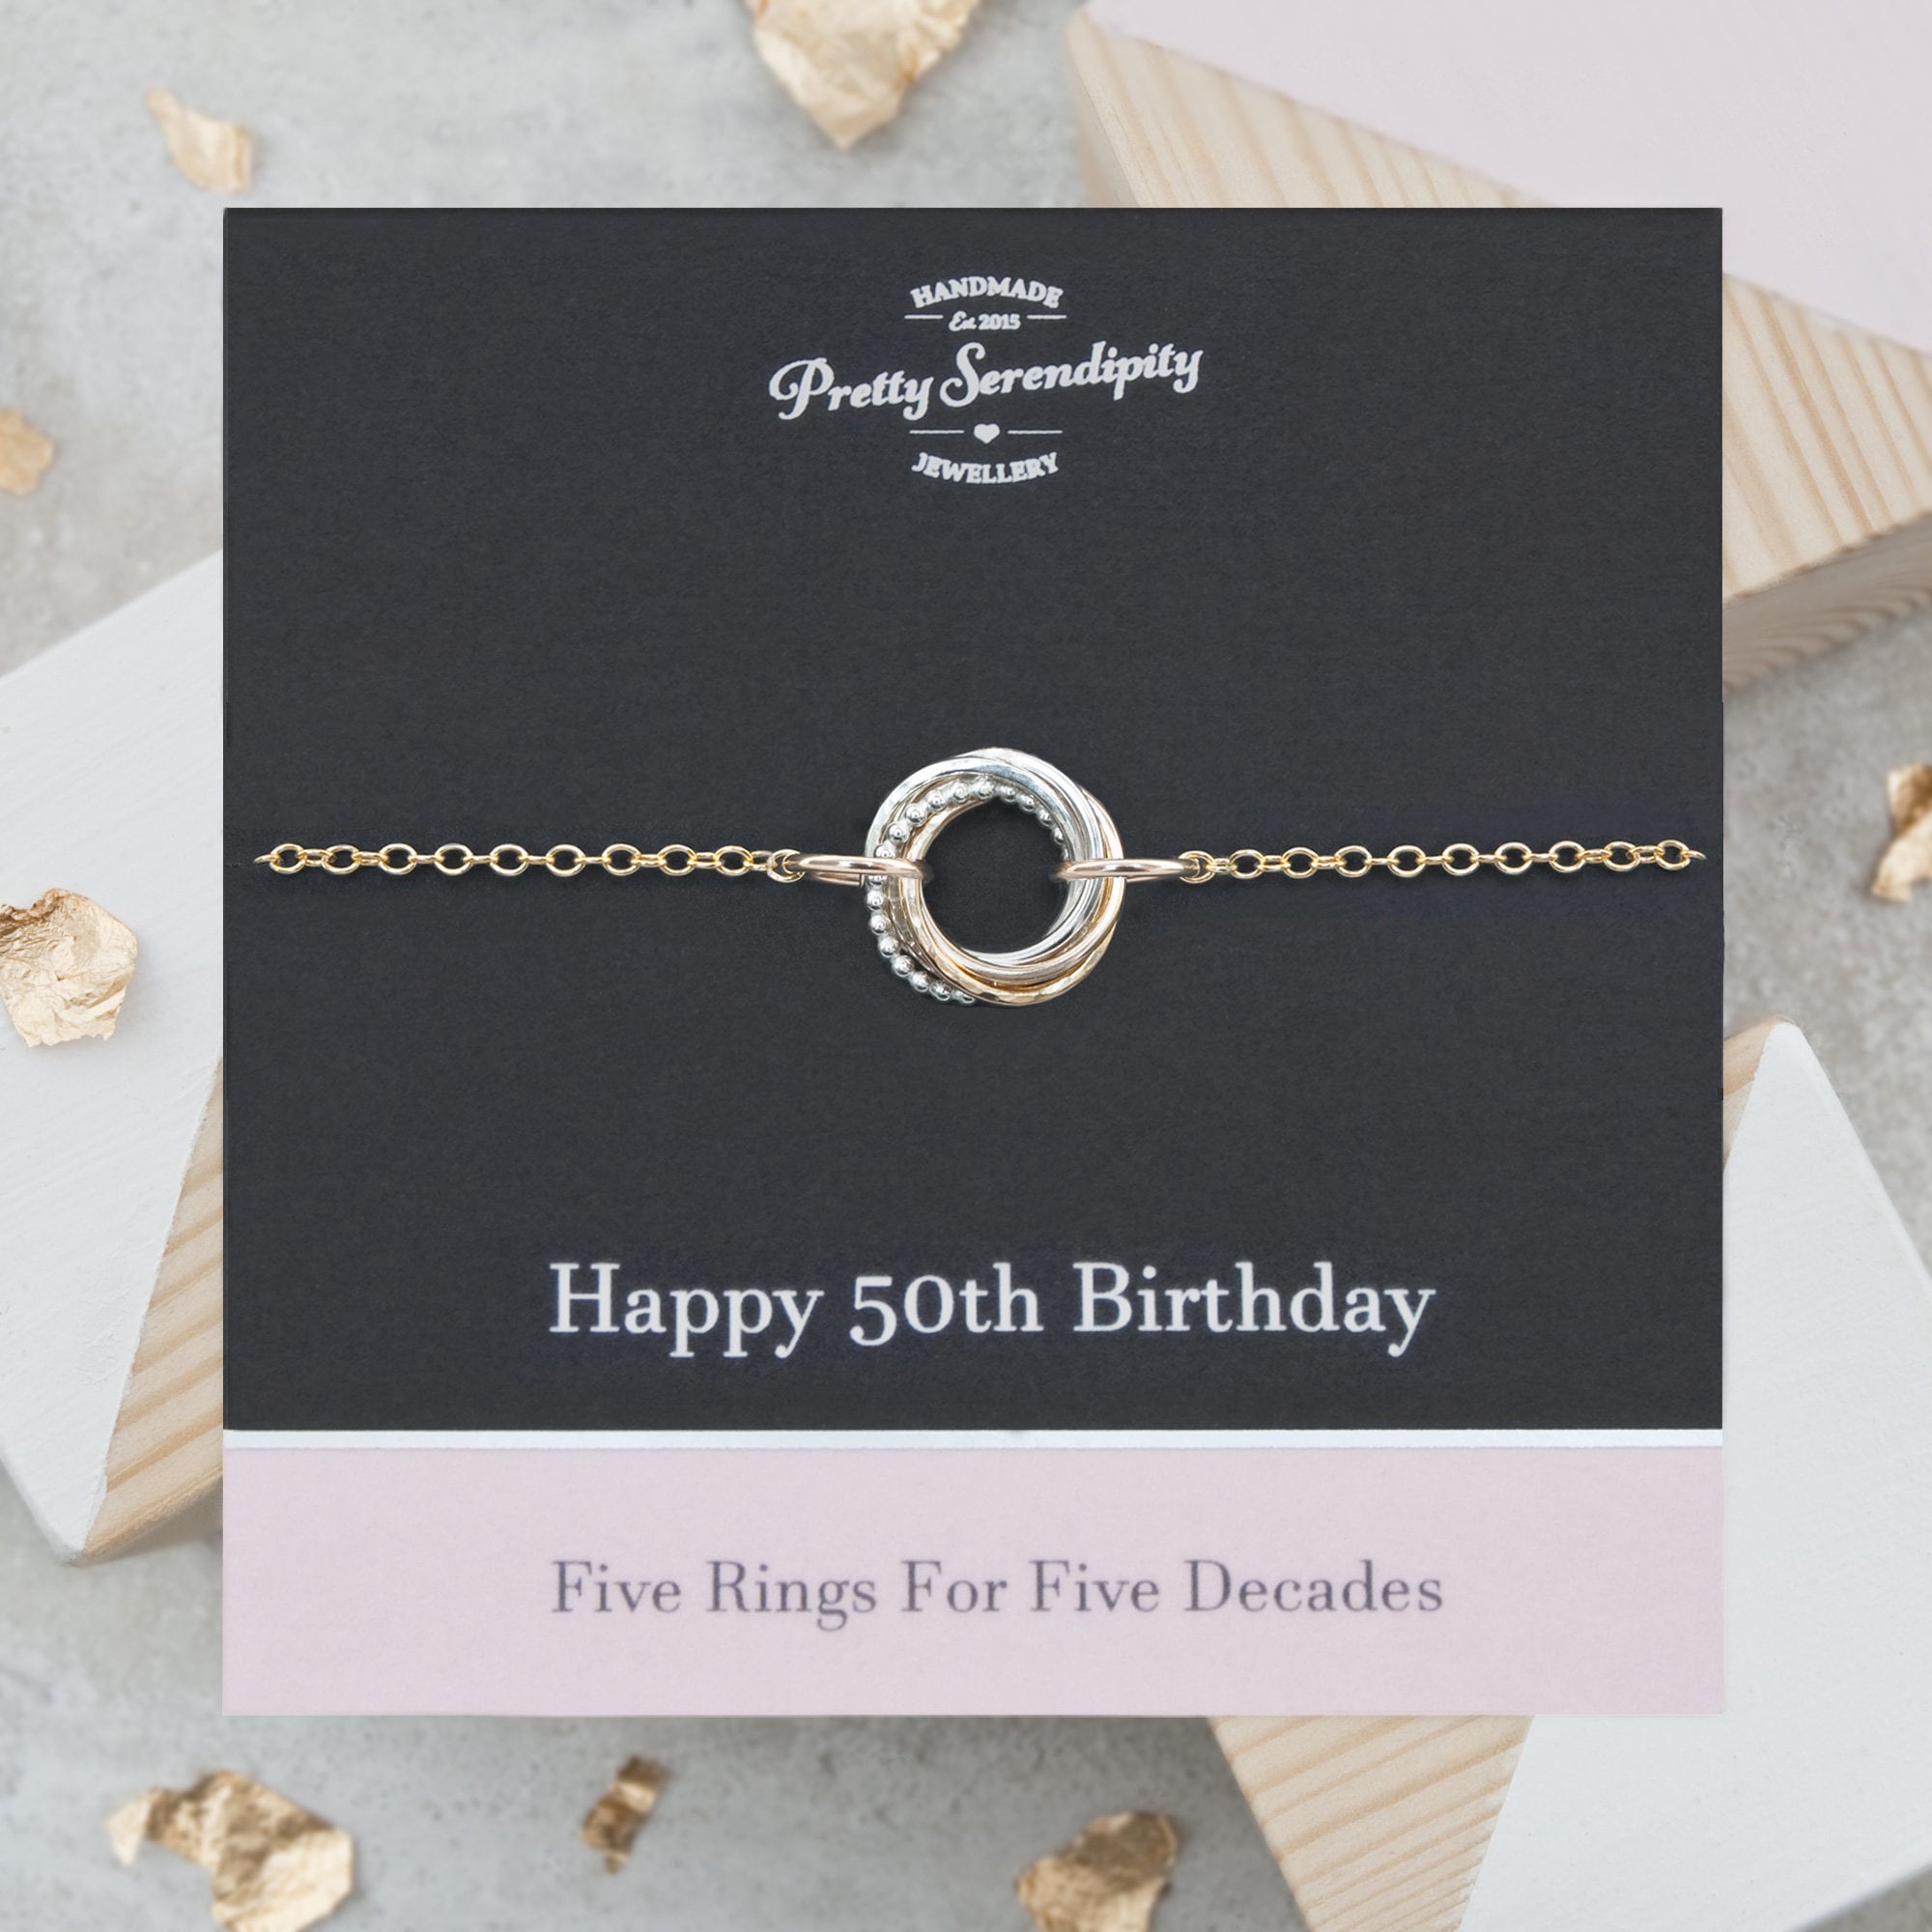 50Th Birthday Mixed Metal Bracelet - 5 Rings For Decades, Gifts Her, Silver & 14Ct Gold Fill